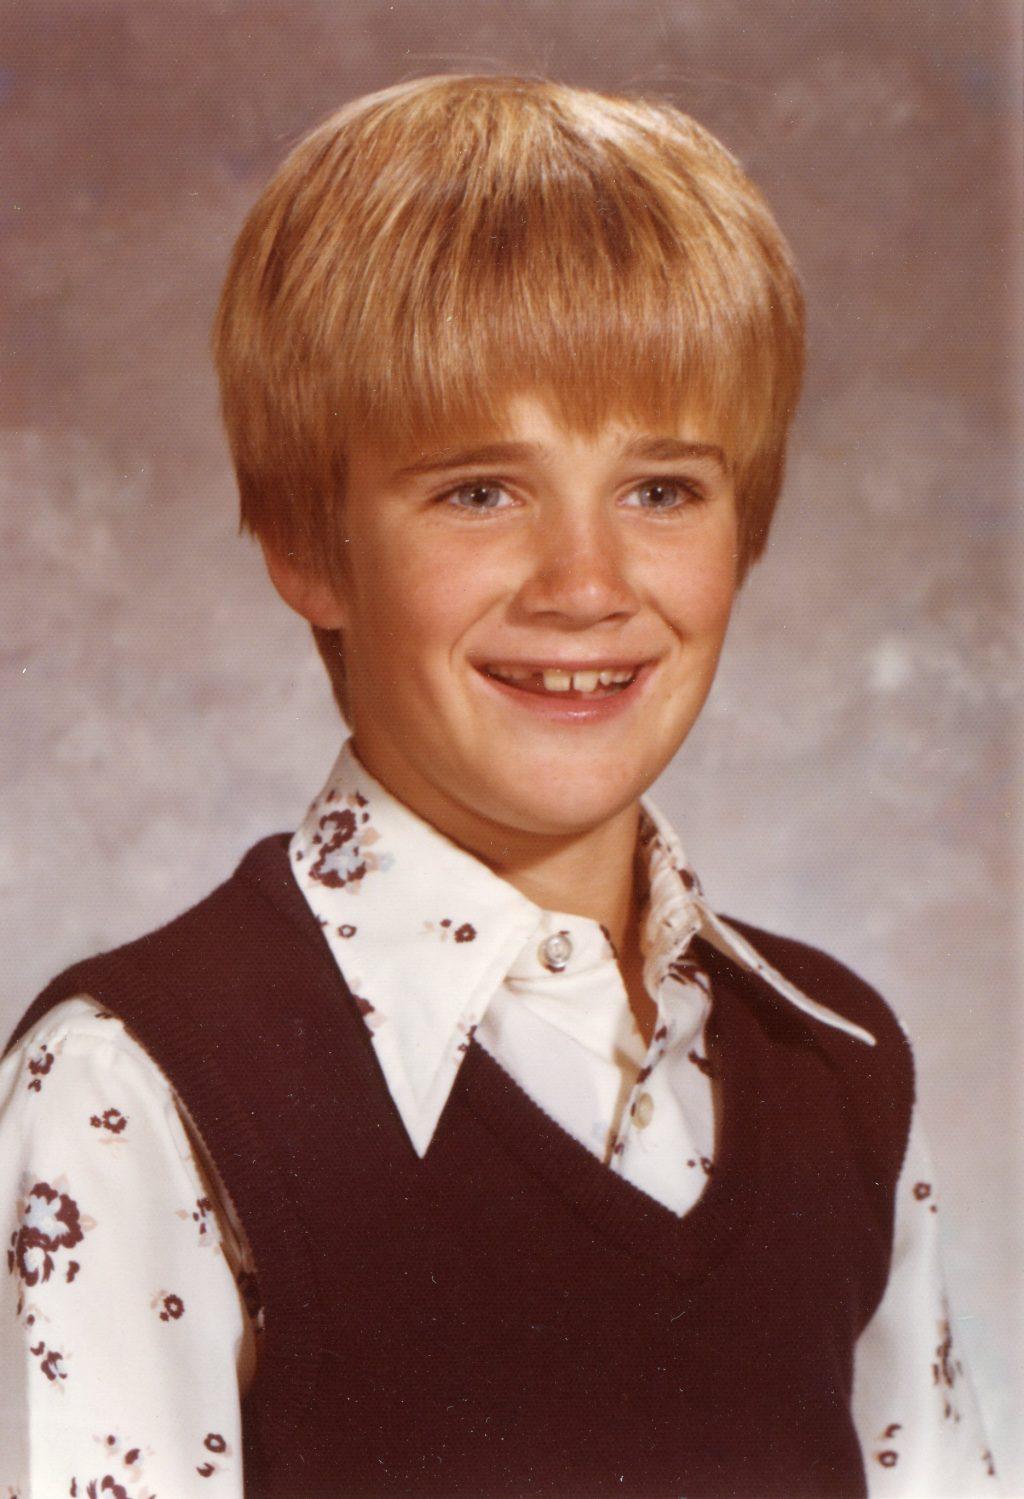 Jim Gash smiles for his fourth-grade school photo. Gash said he lived on a street with other kids whom he often played outside with. Photo courtesy of Jim Gash